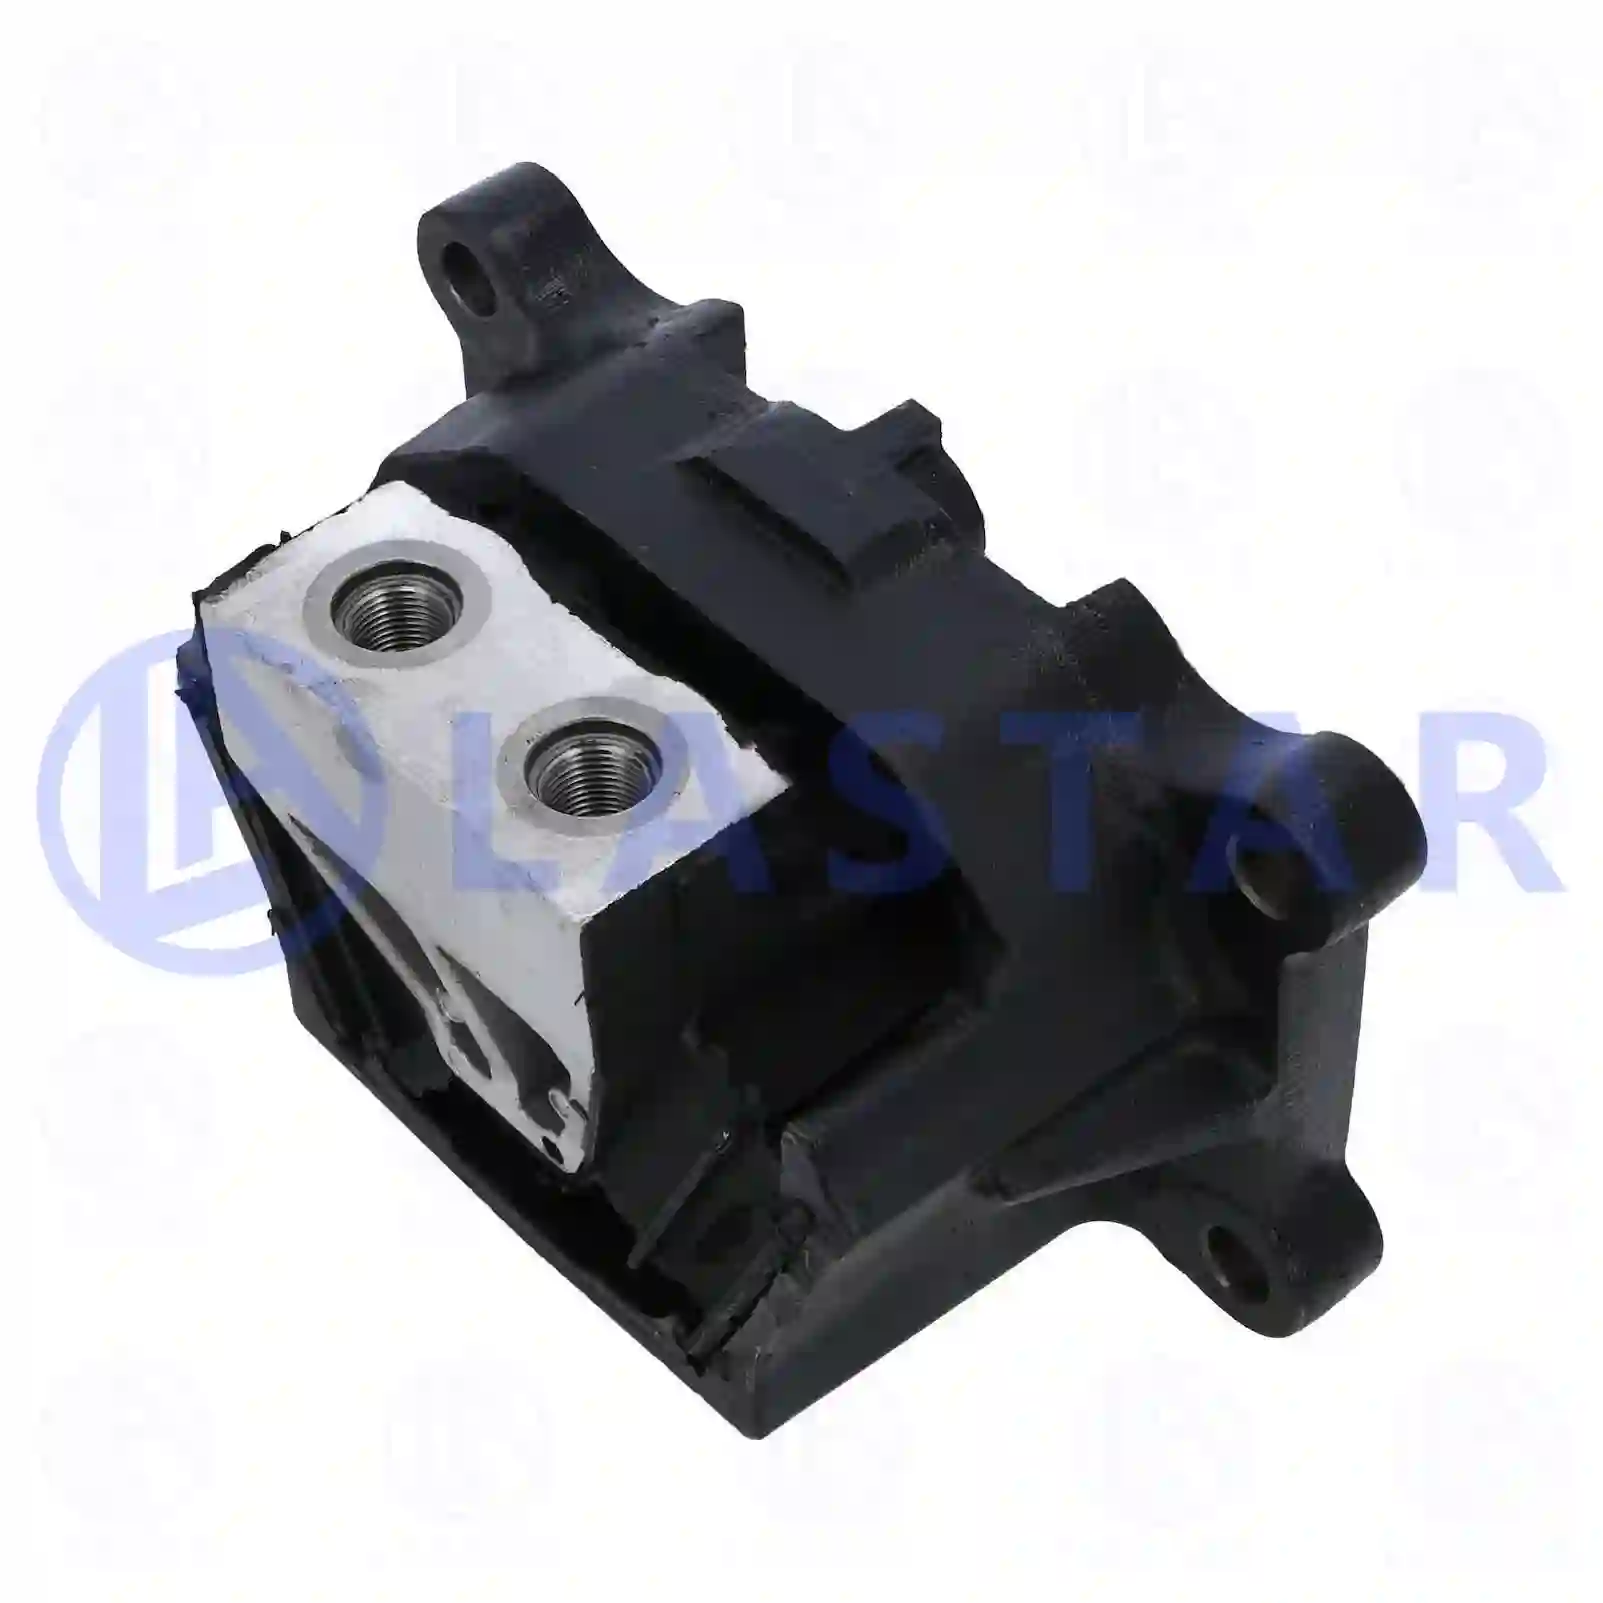 Engine mounting, 77702413, 9412419713, , , , ||  77702413 Lastar Spare Part | Truck Spare Parts, Auotomotive Spare Parts Engine mounting, 77702413, 9412419713, , , , ||  77702413 Lastar Spare Part | Truck Spare Parts, Auotomotive Spare Parts